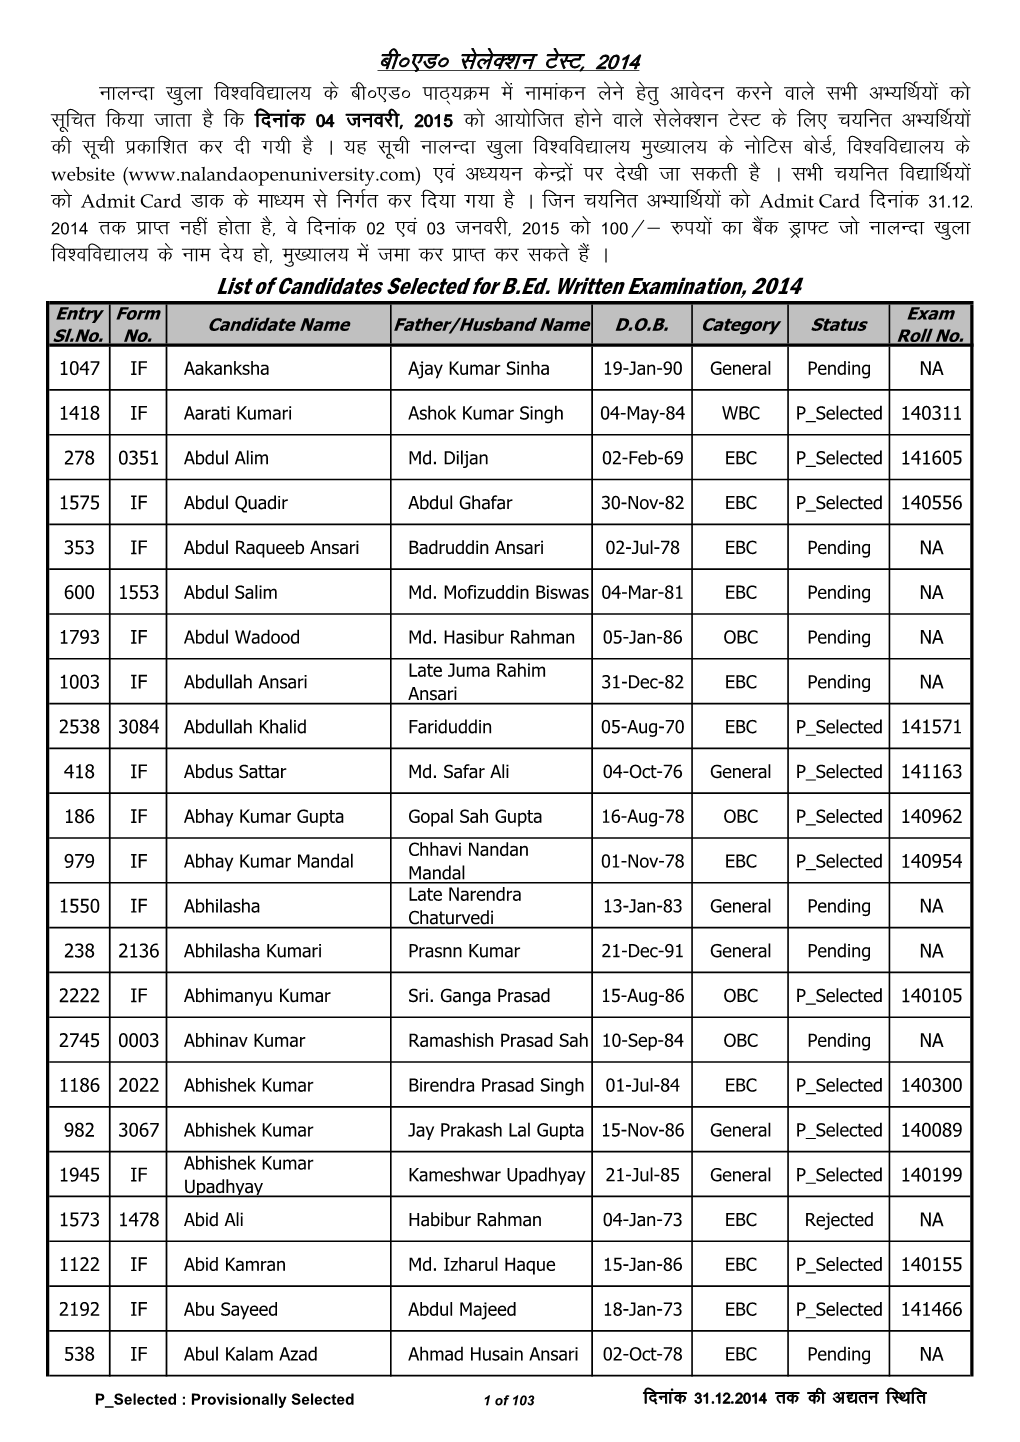 Final List of Candidates Selected for B.Ed. Written Examination